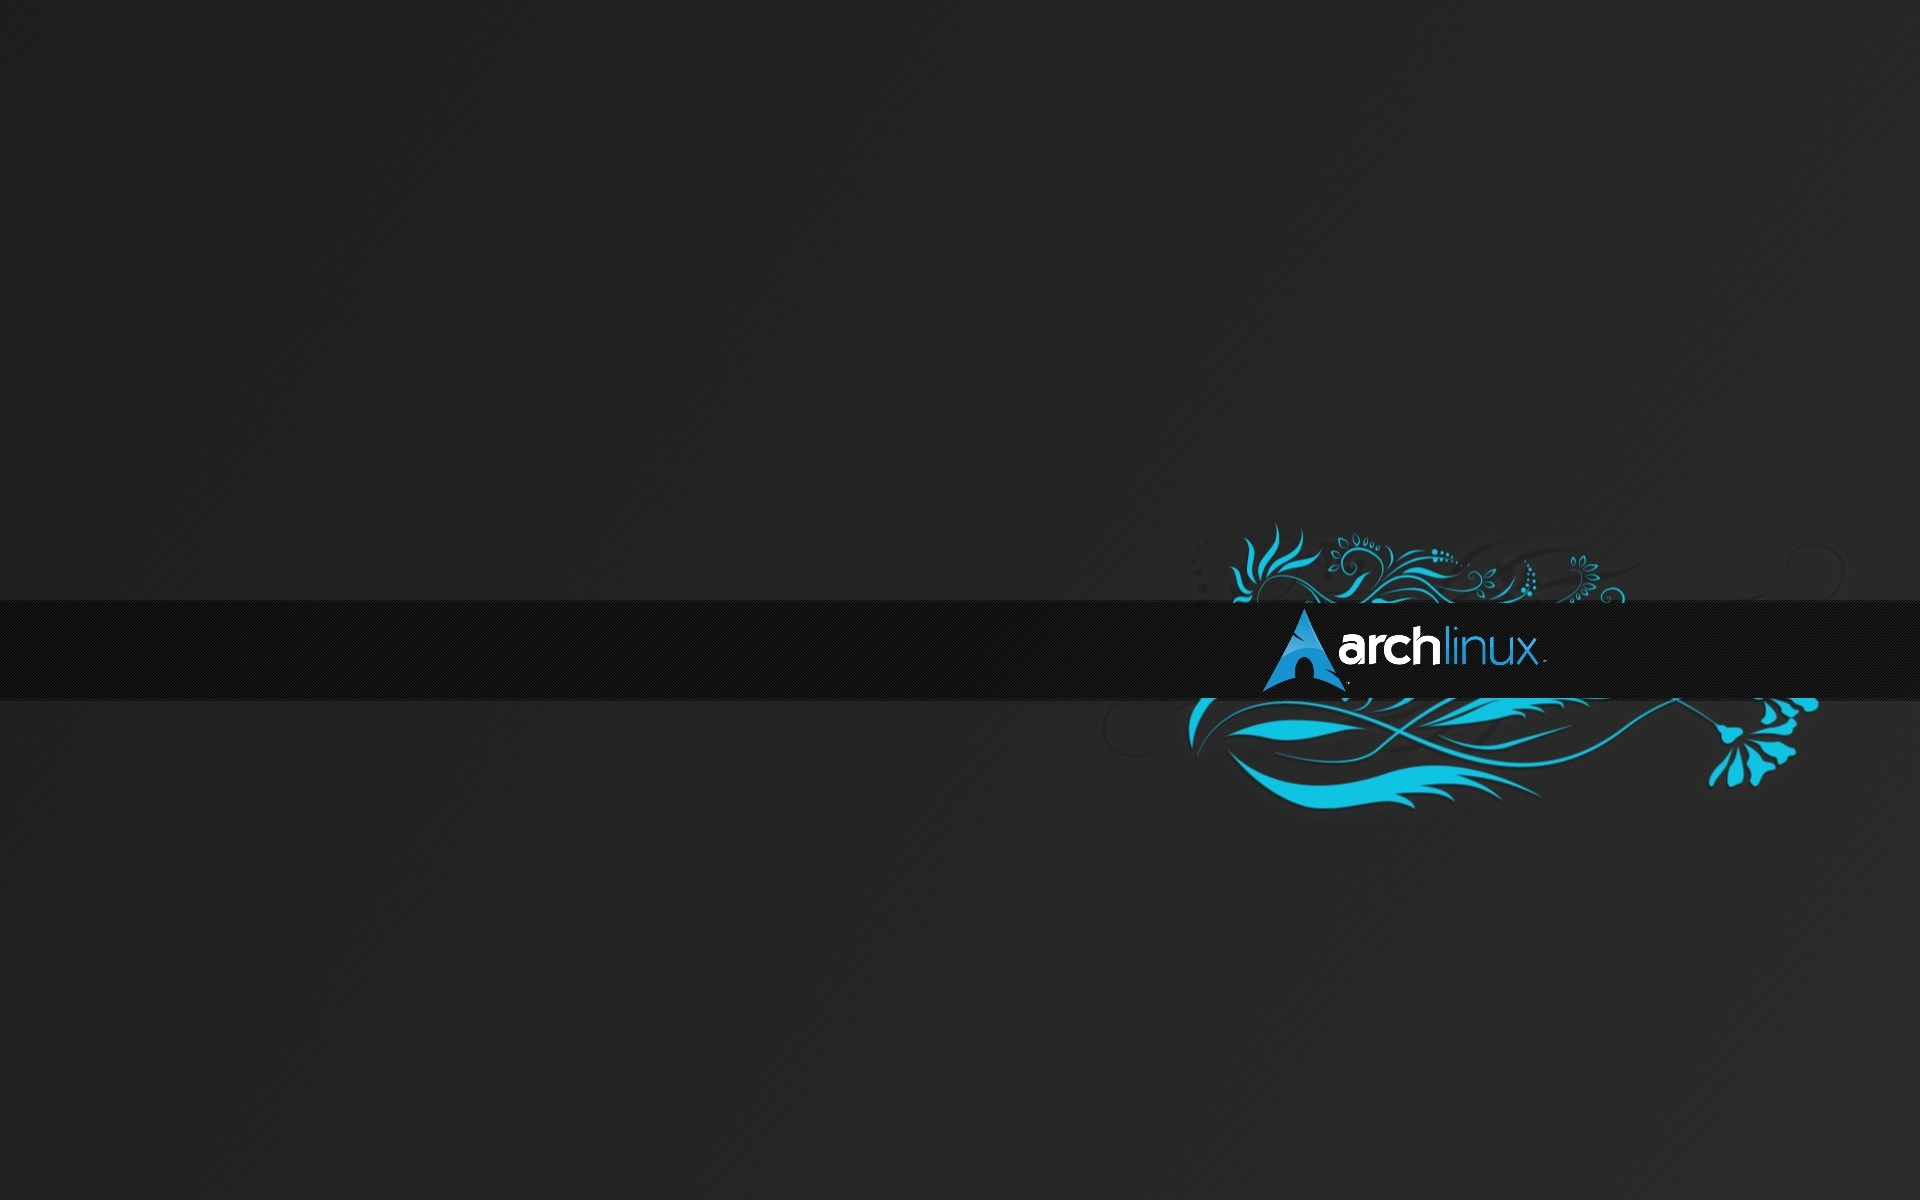 Arch Linux Wallpaper on Linux Arch Software Hd Wallpaper   Computer   Systems   377161